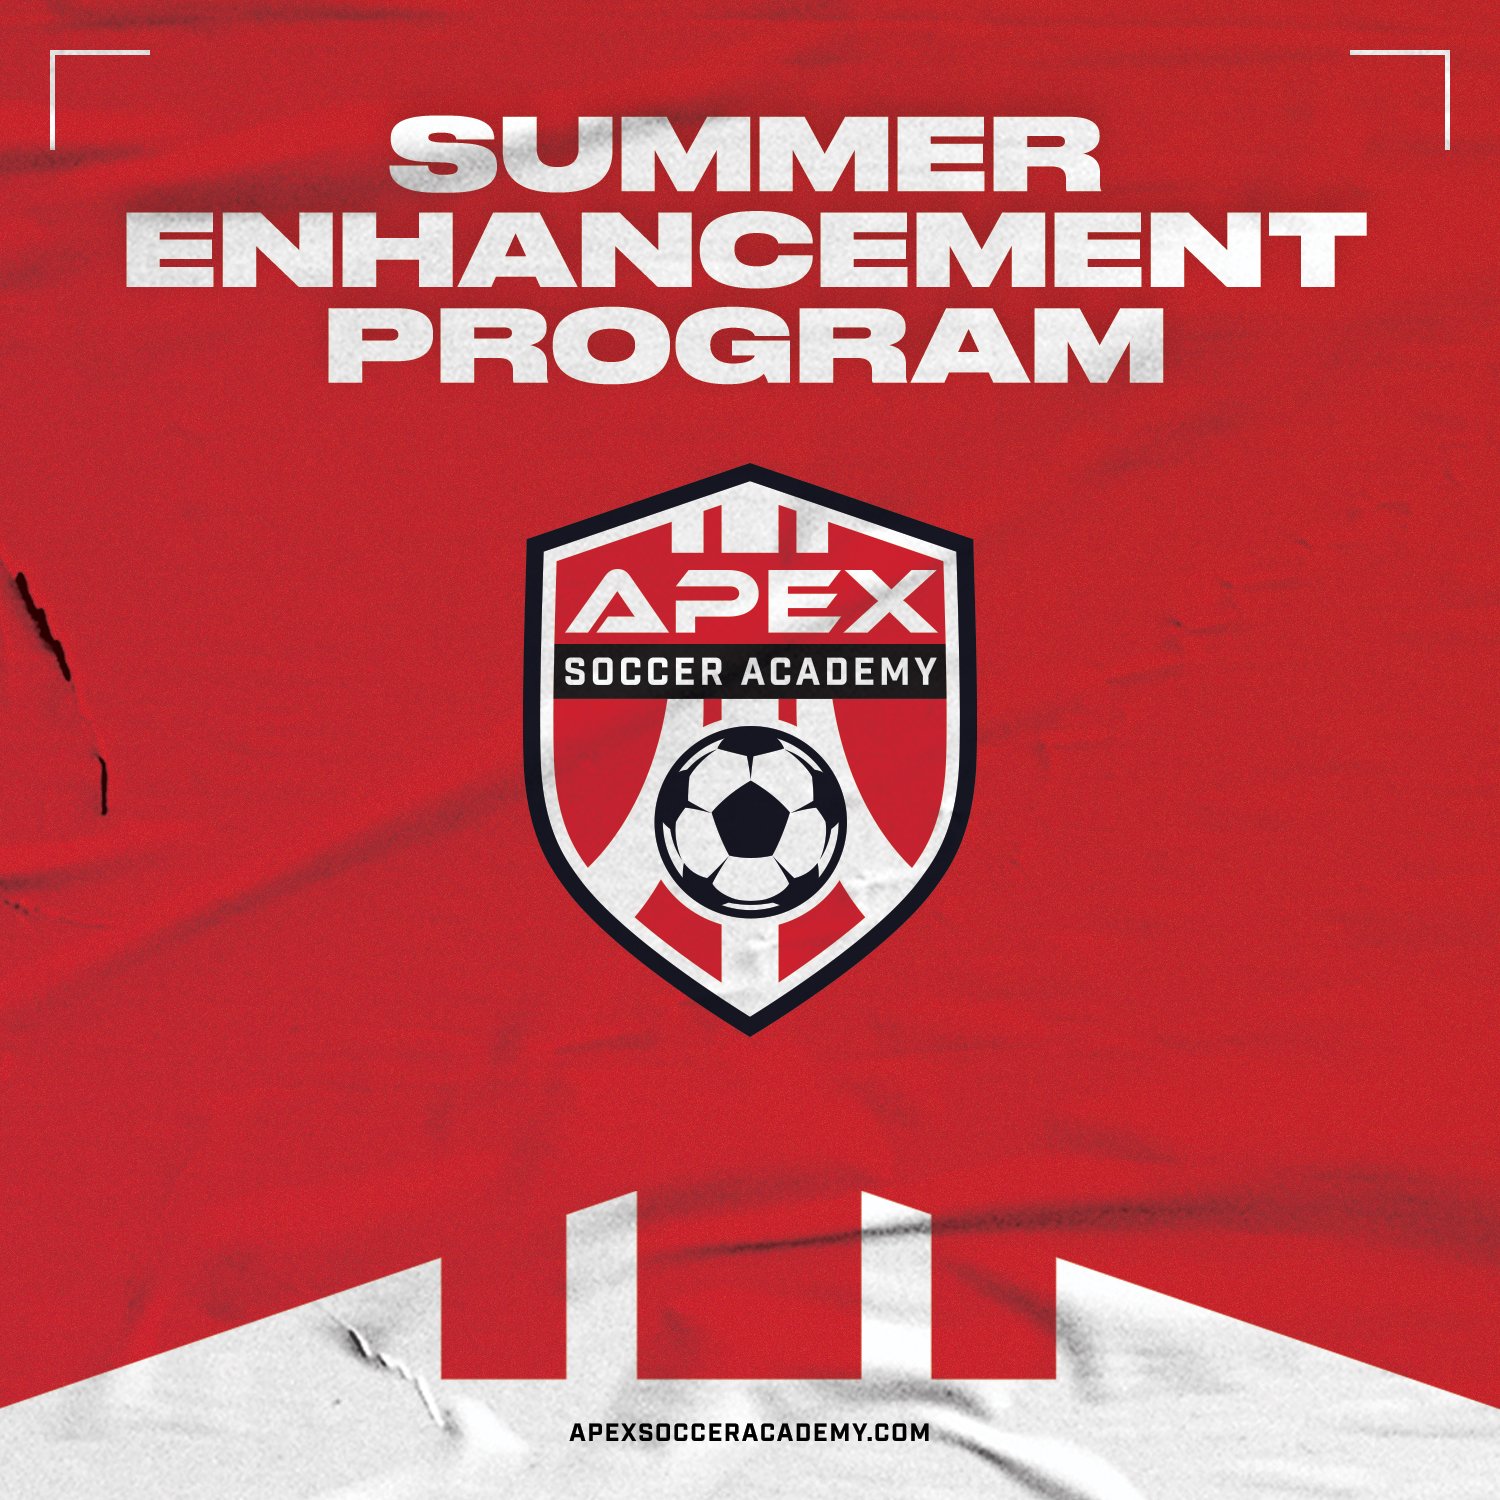 We are beyond excited to announce a NEW Summer opportunity to our Apex and NSC families‼

Apex Soccer Academy invites you to join our 6-week enhancement program at the state-of-the-art Gregg Young Sports Campus. Throughout the 6-week enhancement prog